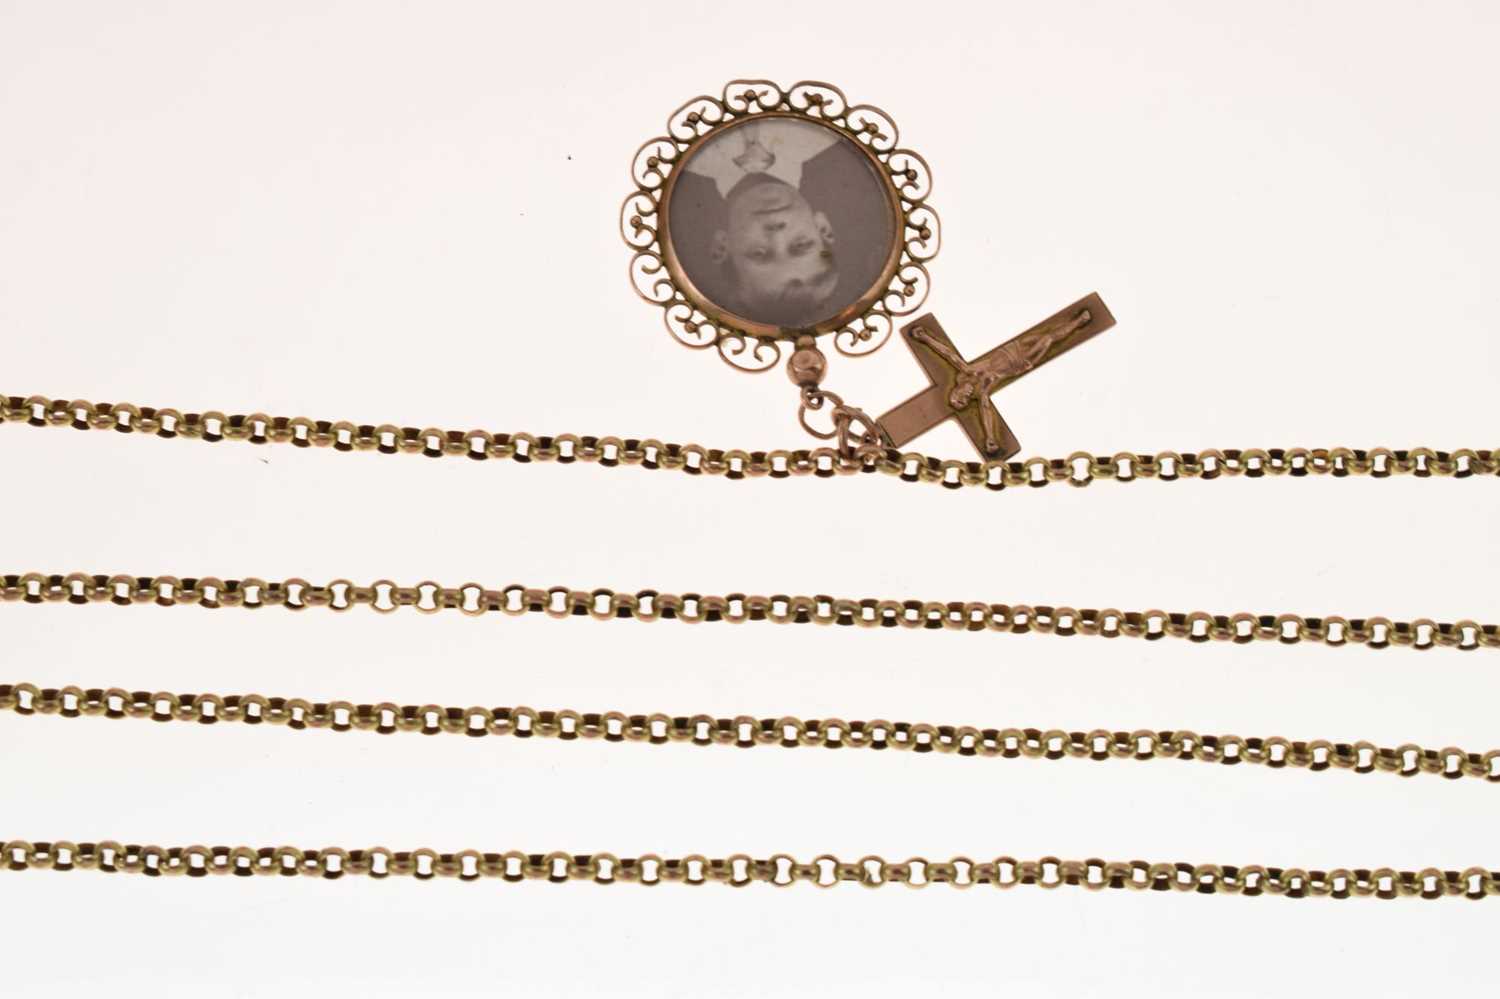 9ct gold belcher link long guard chain - Image 5 of 5